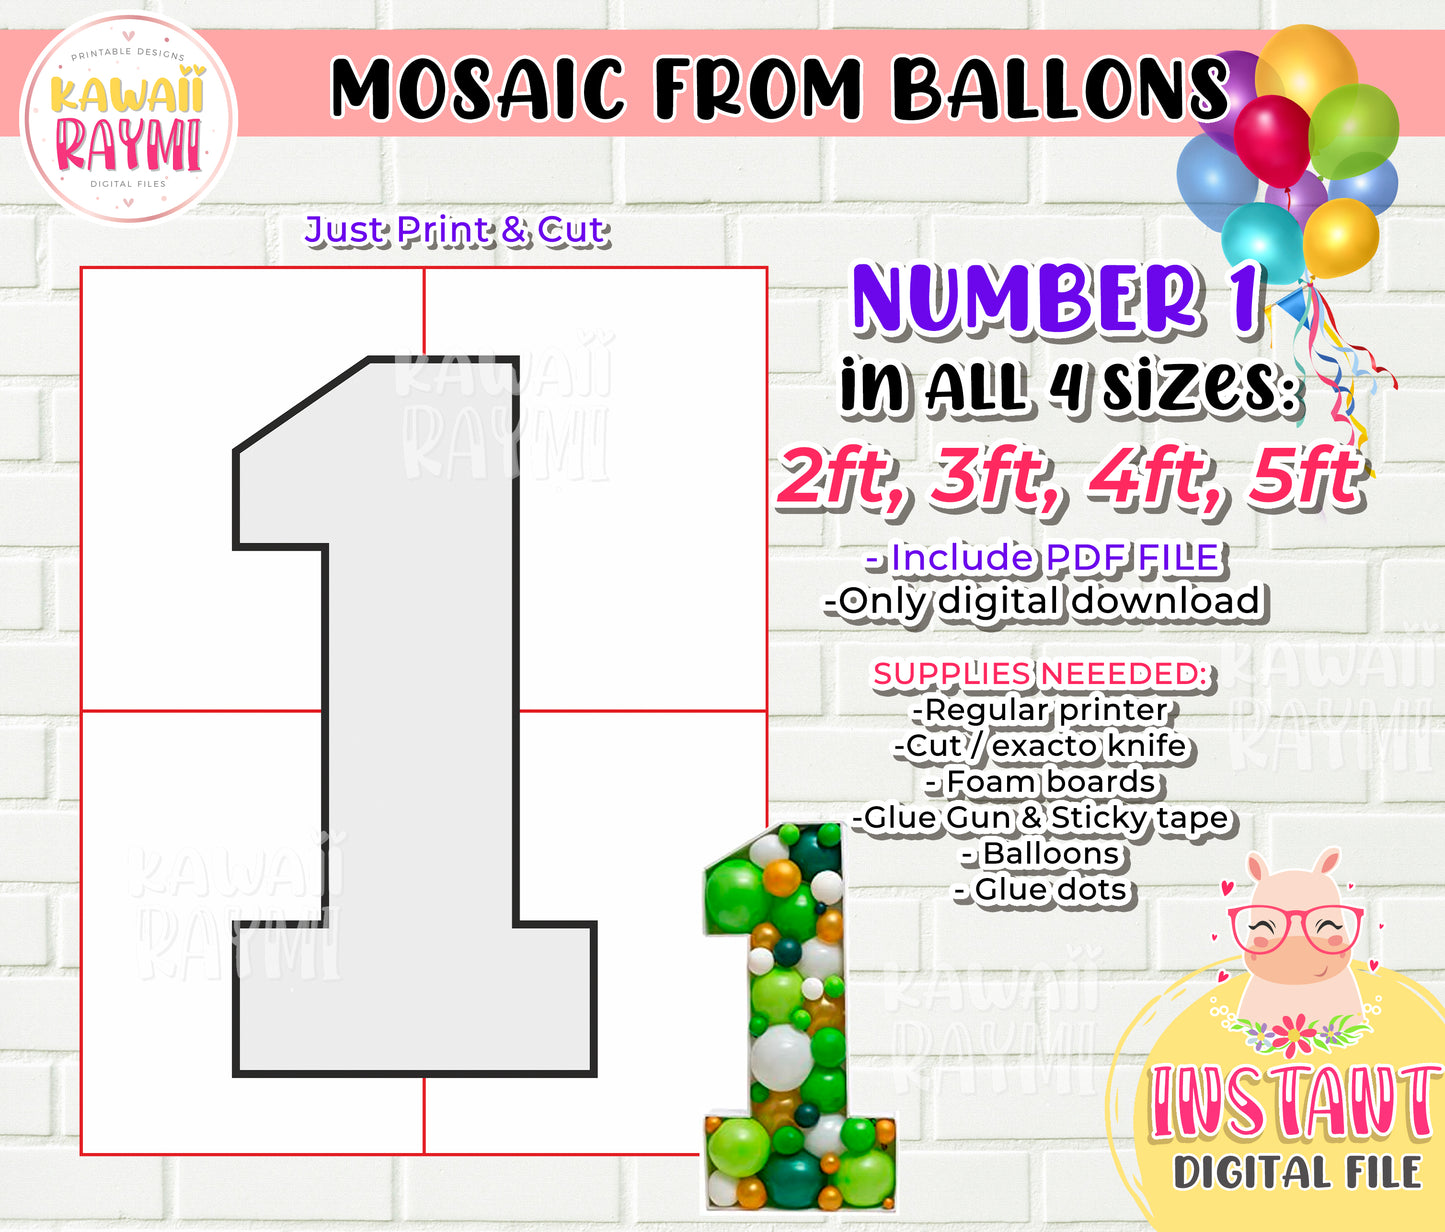 SQUARE Number 1, Balloon Mosaic Template, One Mosaic Number Template, Mosaic Numbers from Balloons, 2ft, 3ft, 4ft, 5ft, Digital Download